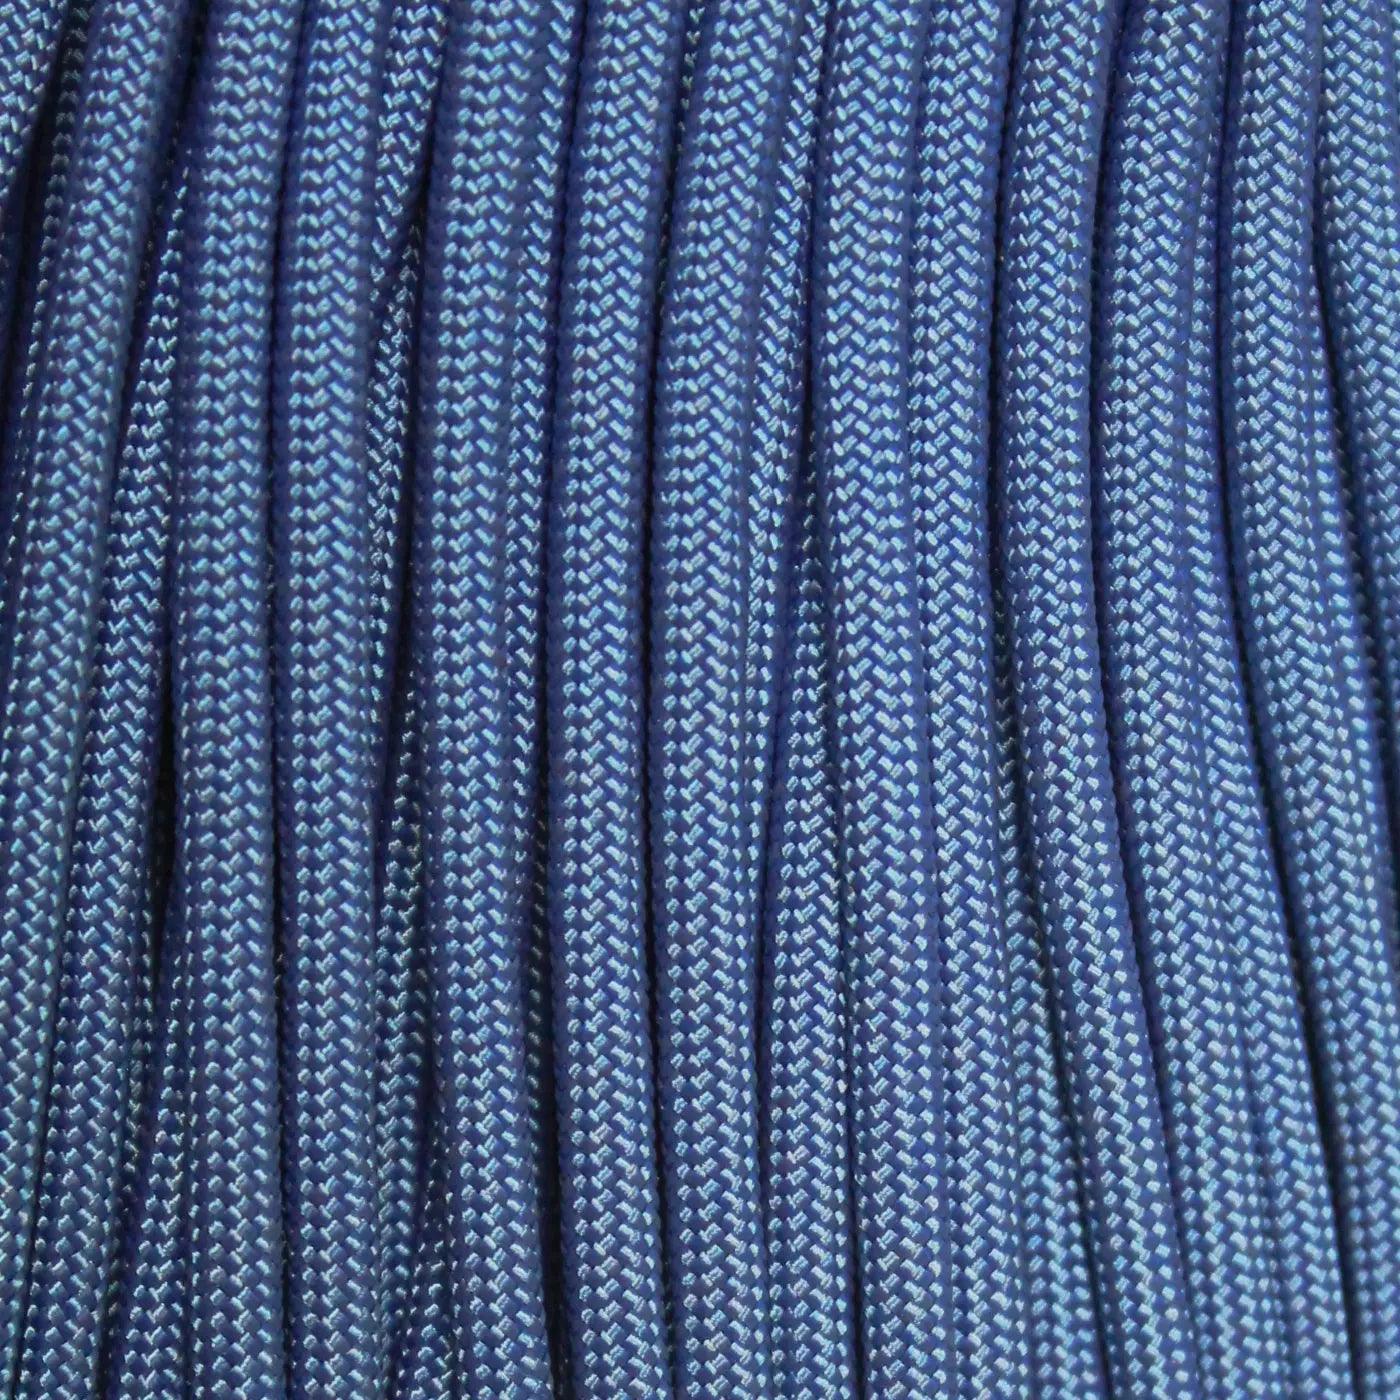 Cobalt Blue 550 Paracord Made in the USA  167- poly/nylon paracord